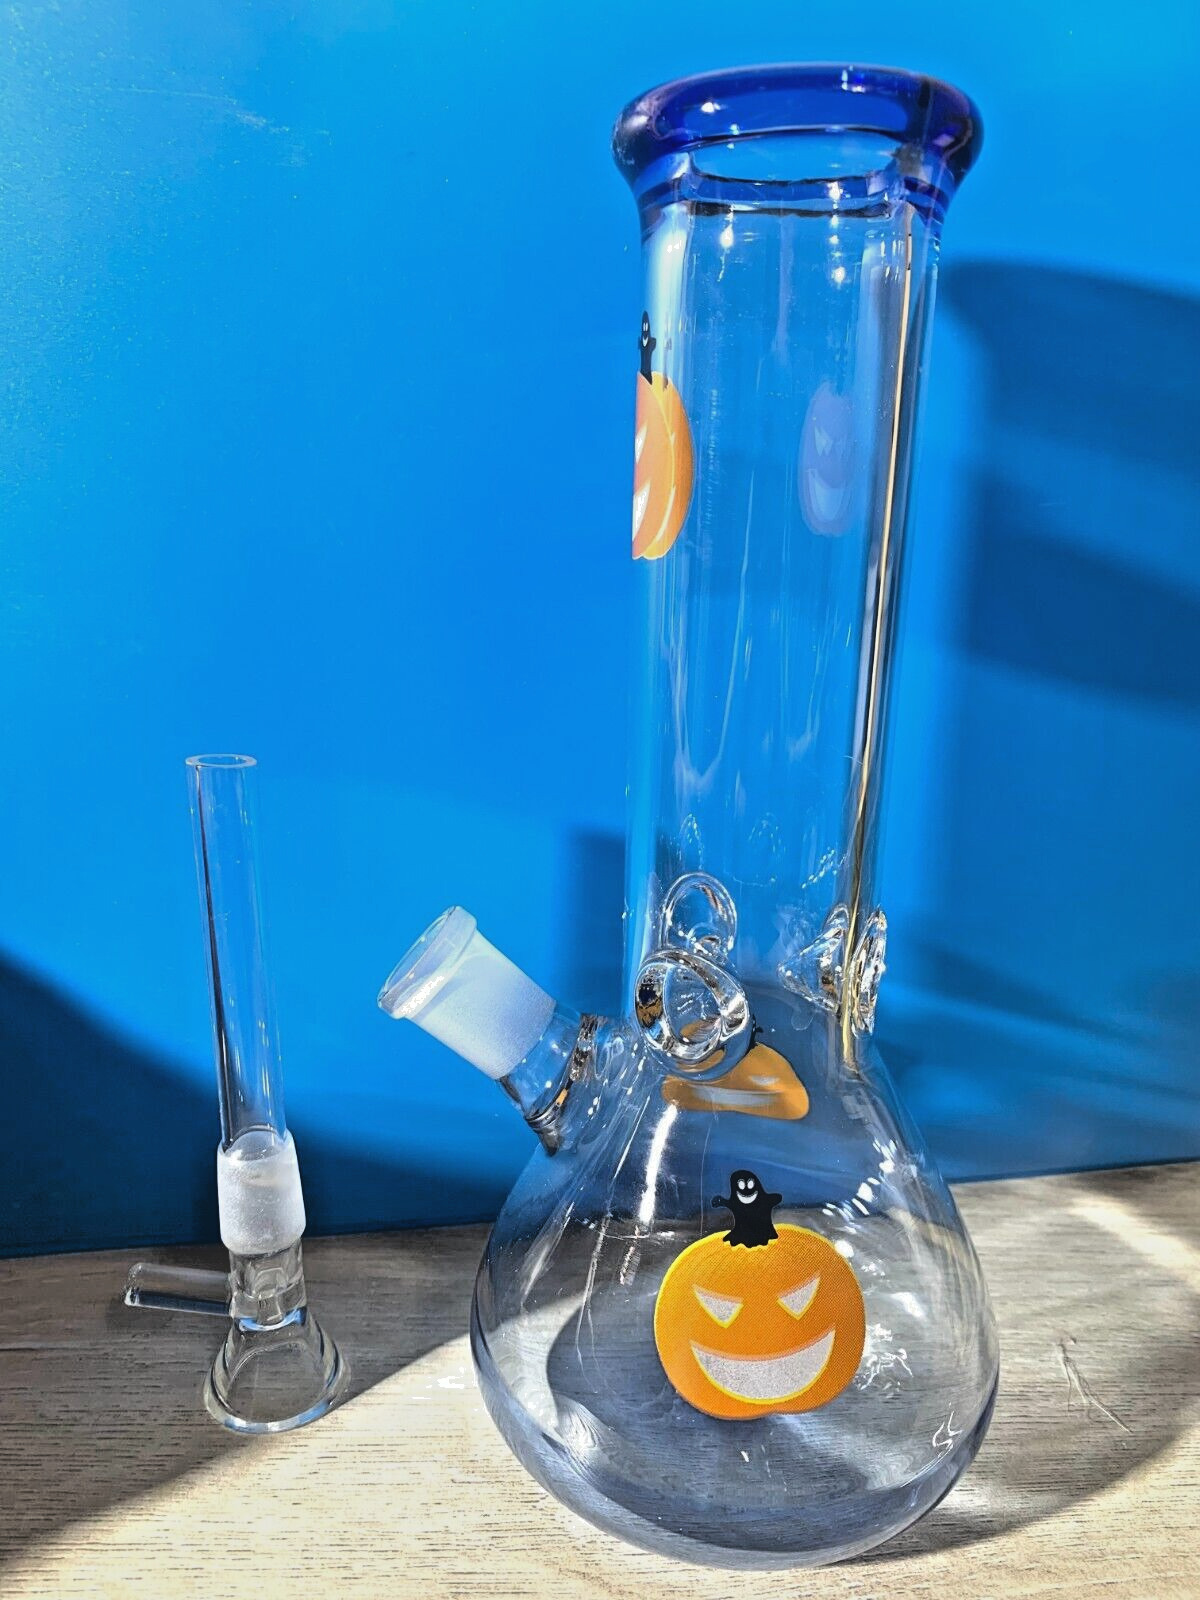 8 Hookah Halloween Pumpkin Clear Water Glass Bong Shisha Tobacco Smoking Pipes. Available Now for 15.99